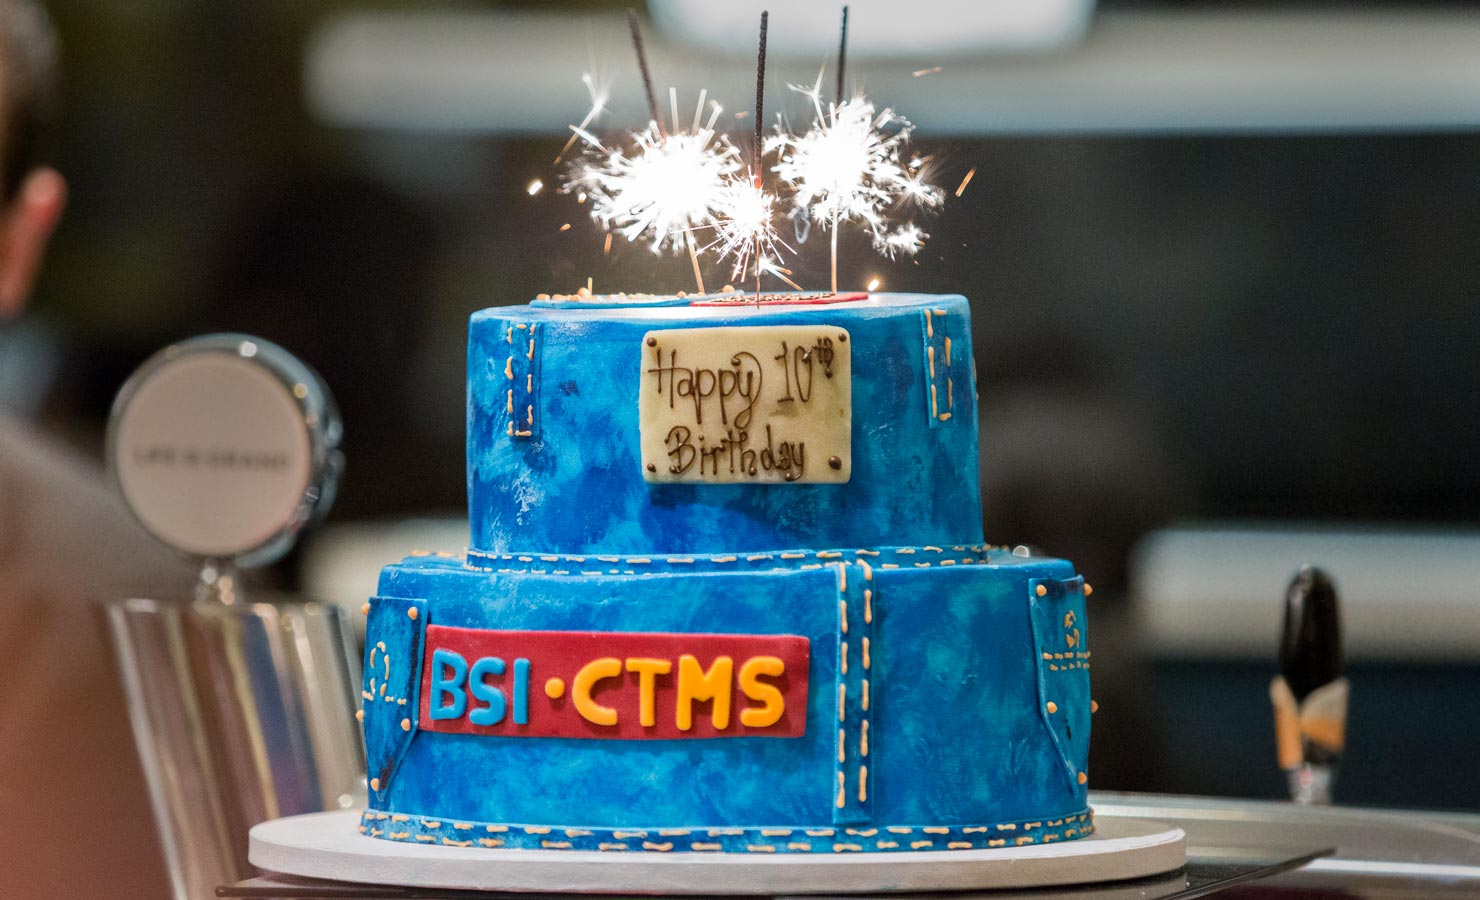 Picture of a blue birthday cake that says "BSI CTMS"